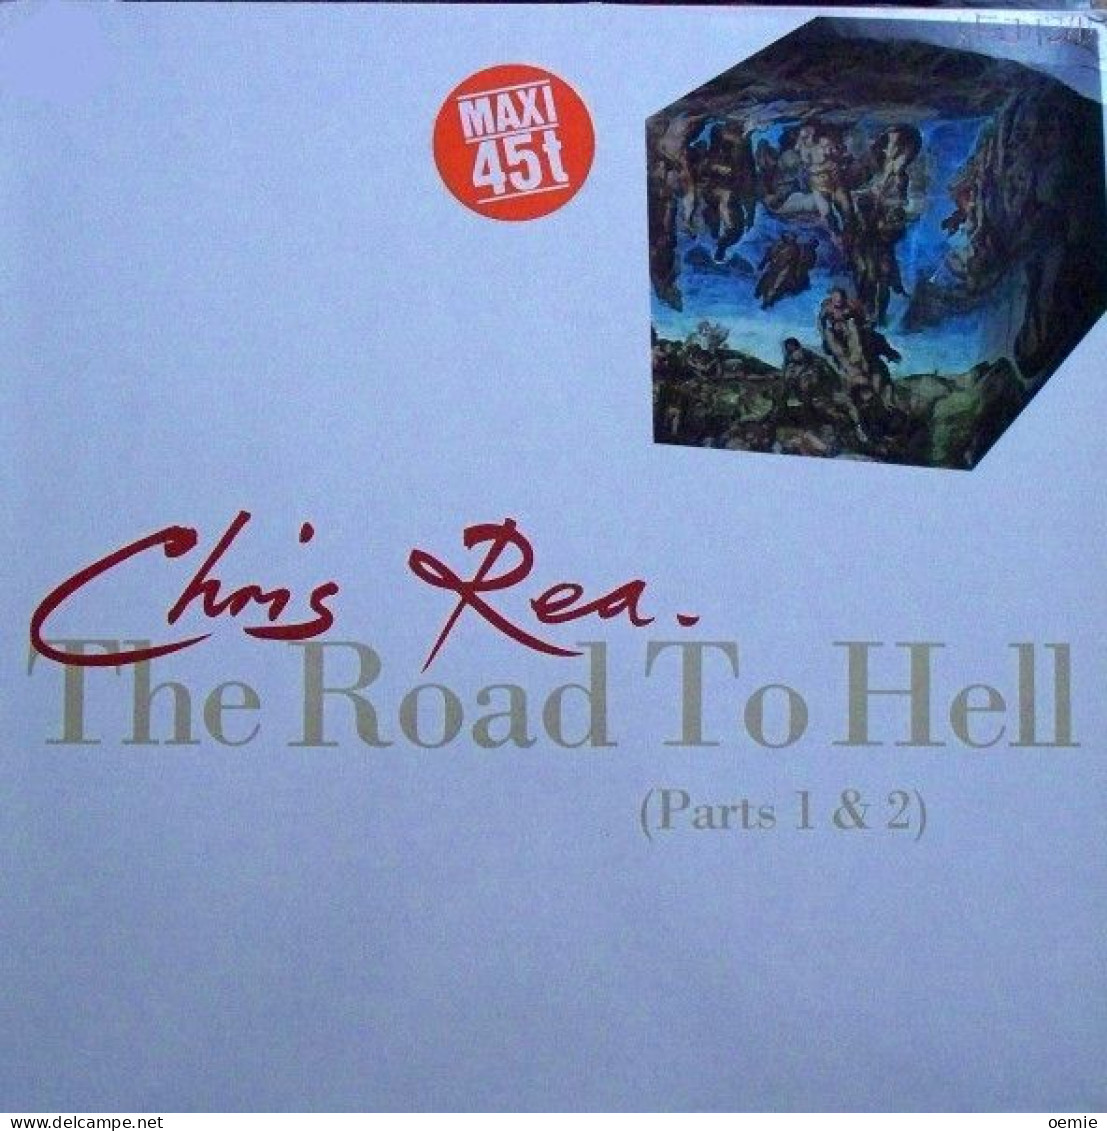 CHRIS REA  THE ROAD TO HELL   PART 1&2 - 45 G - Maxi-Single